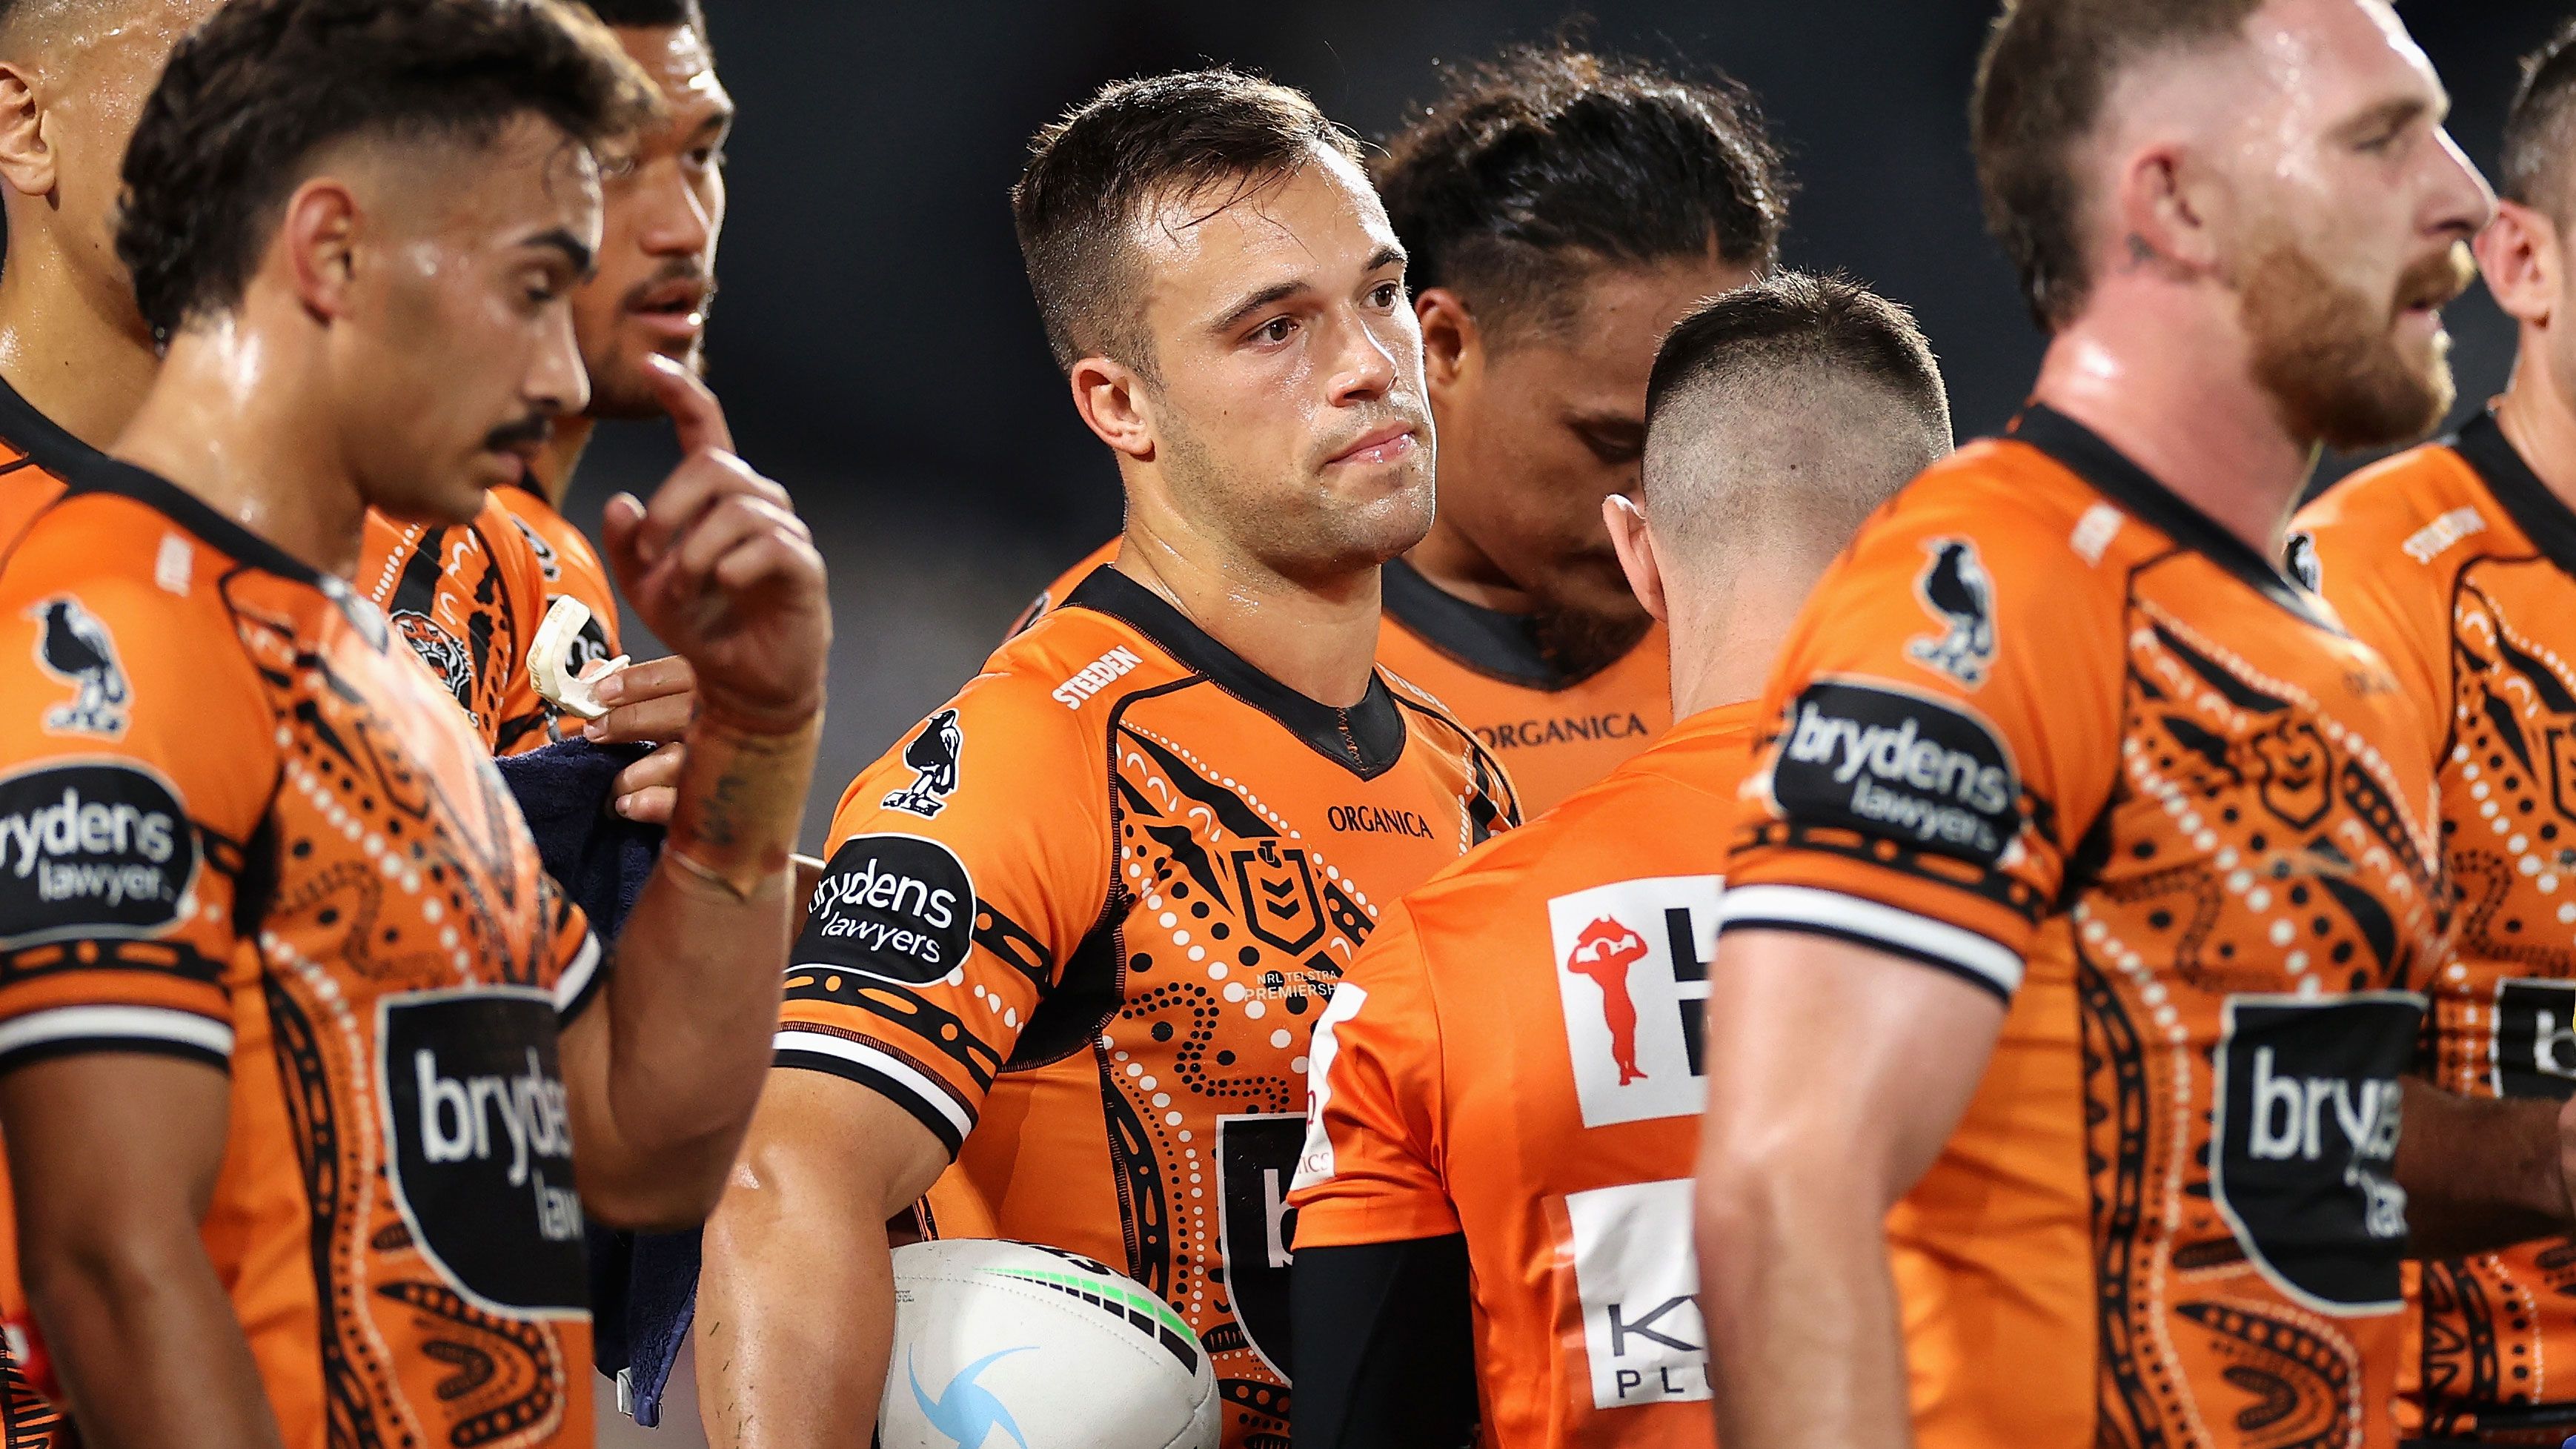 Luke Brooks reacts after the Wests Tigers conceded a try.